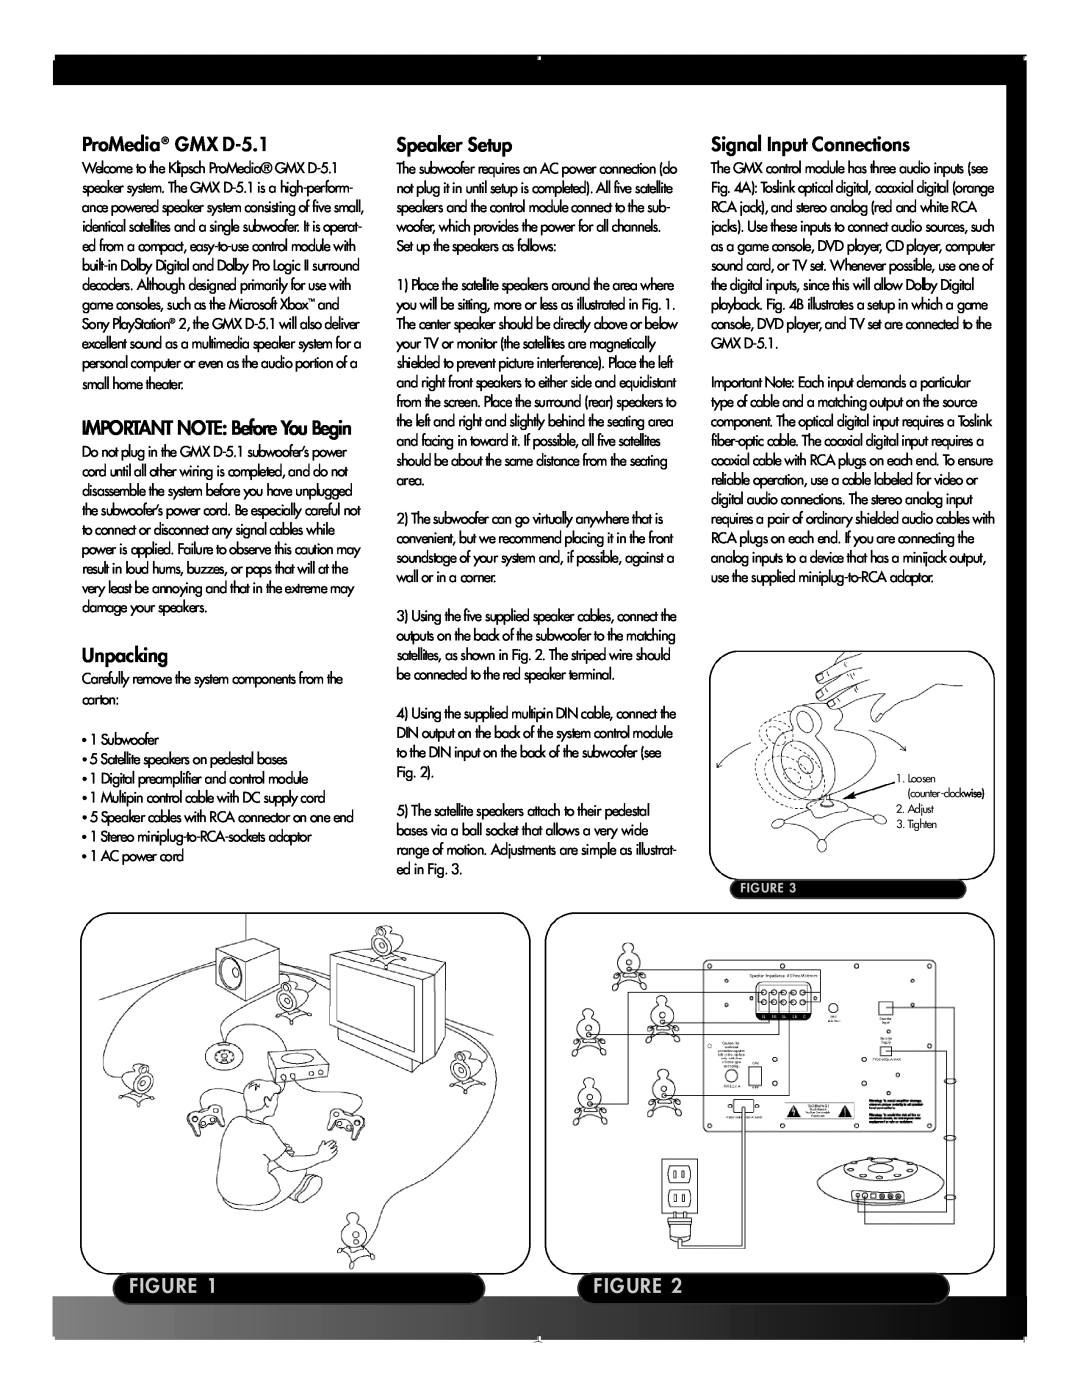 Klipsch manual ProMedia GMX D-5.1, Unpacking, Speaker Setup, Signal Input Connections, IMPORTANT NOTE Before You Begin 